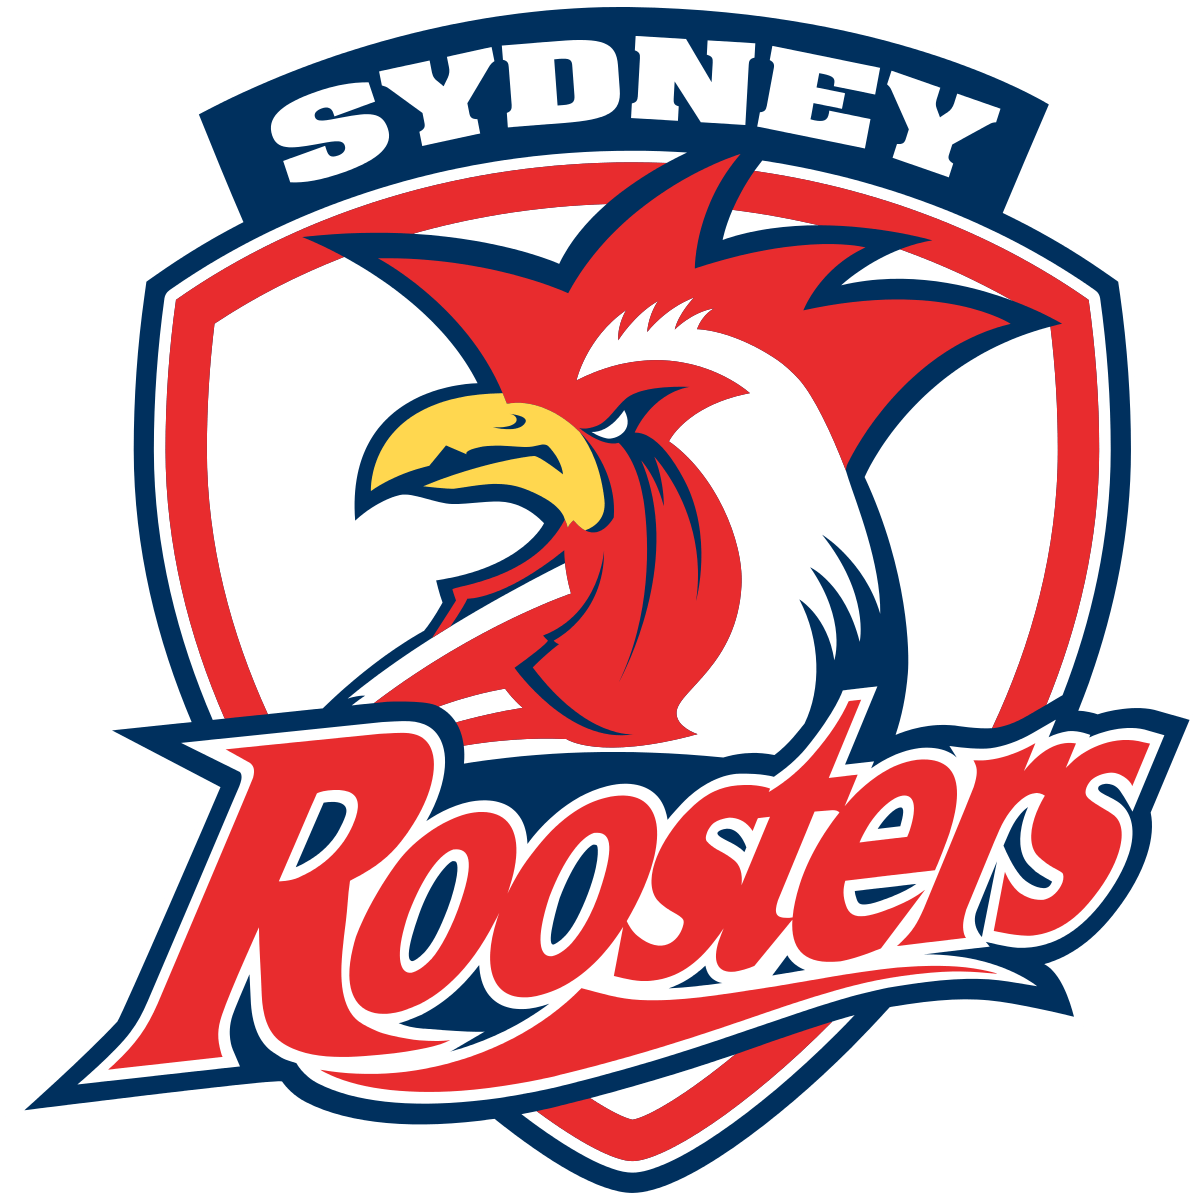 Most Famous Rooster Logo - Sydney Roosters